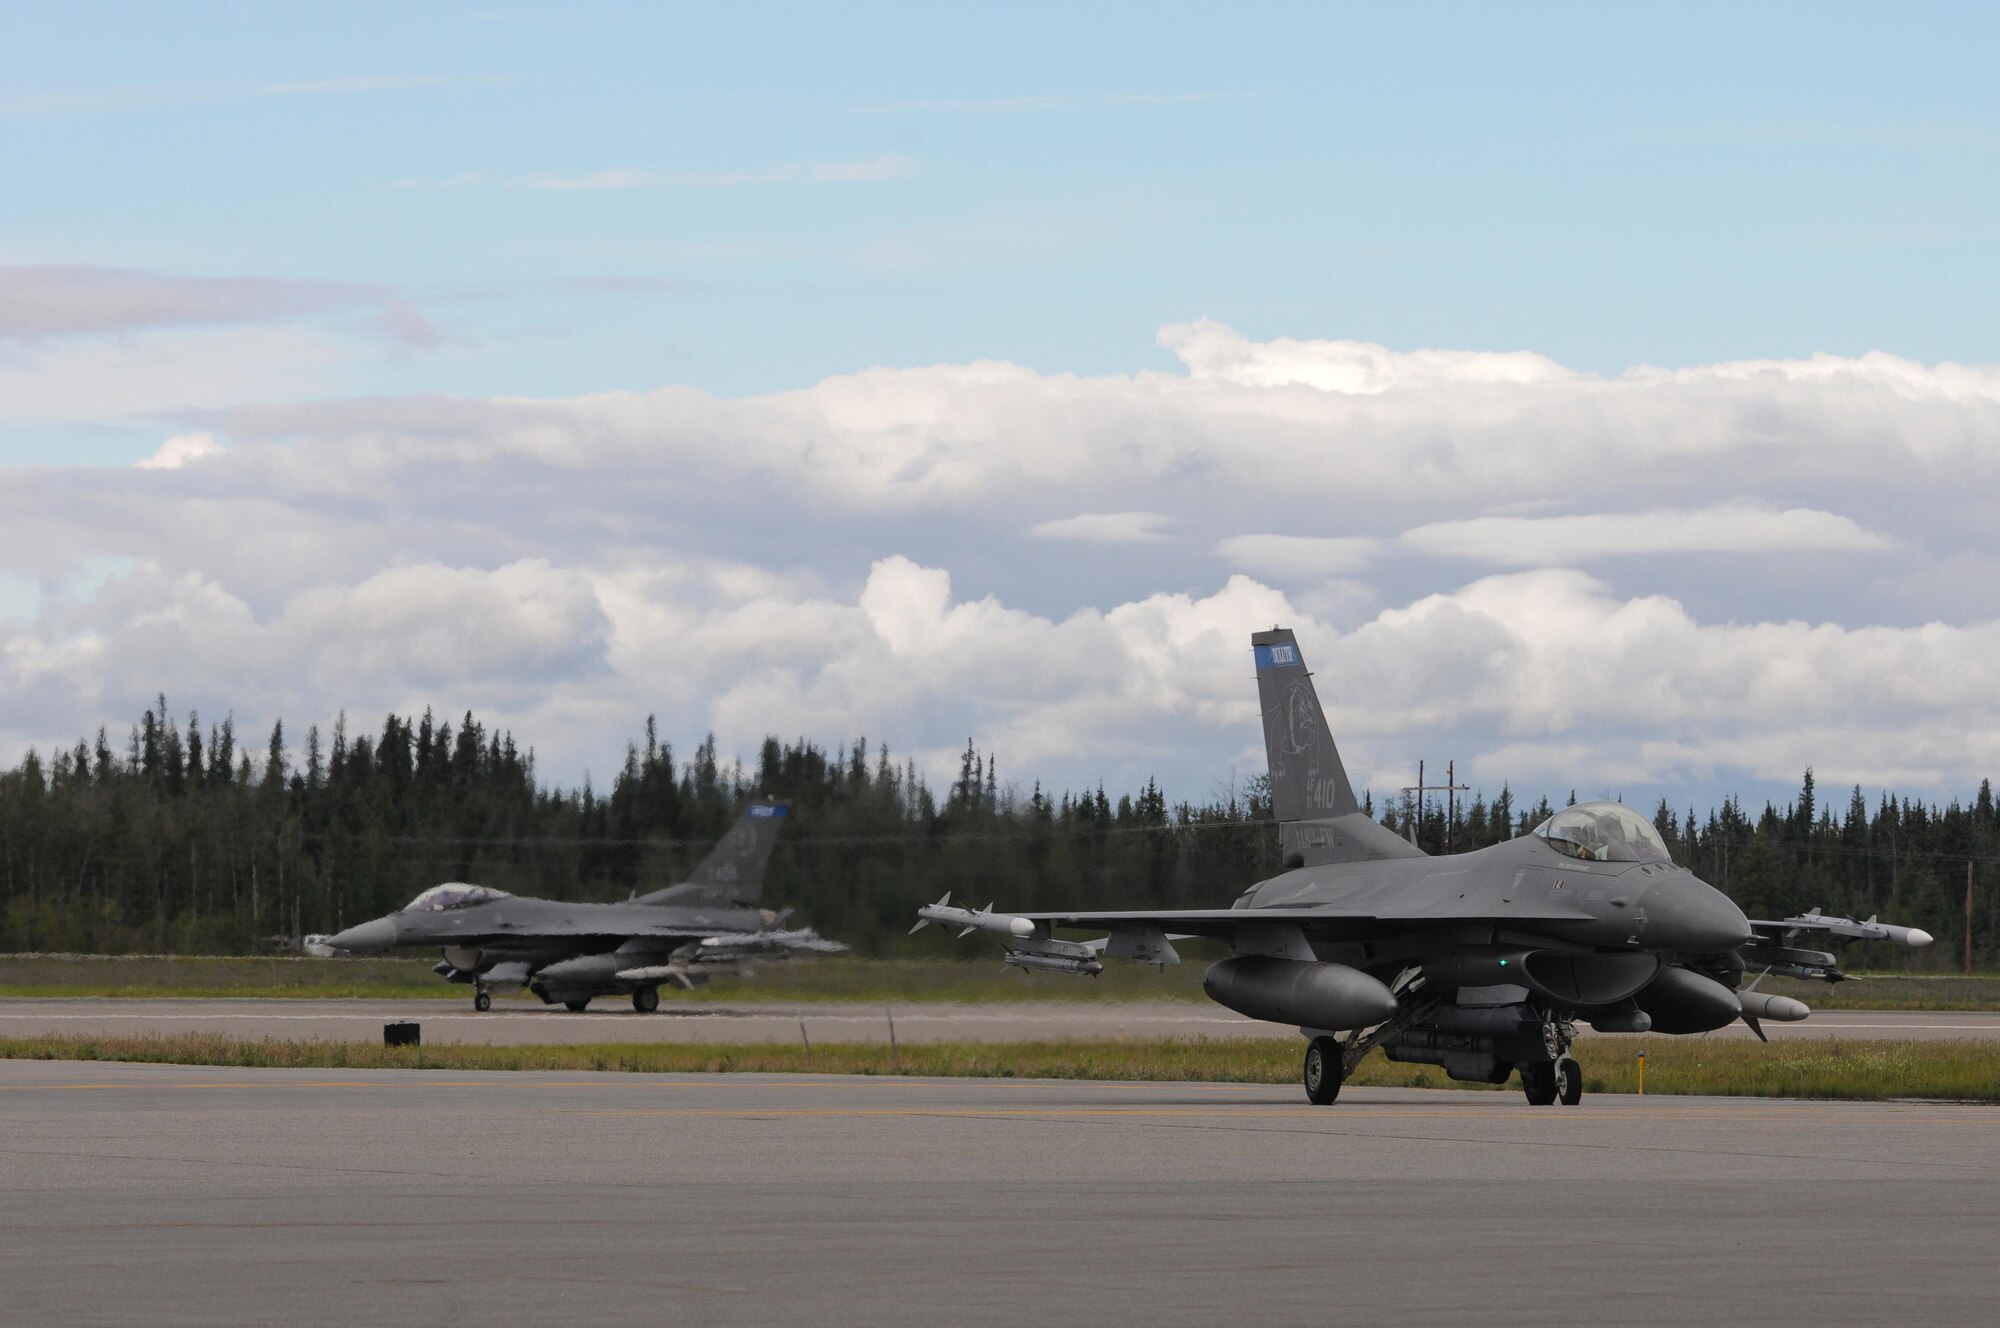 U.S. Air Force F-16 Fighting Falcons from the 148th Fighter Wing, Duluth, Minn., taxi on to the ramp at Eielson Air Force Base, Alaska, Aug. 11, 2015, during RED FLAG-Alaska 15-3.  RF-A is a Pacific Air Forces commander-directed field training exercise for U.S. and partner nation forces, providing combined offensive counter-air, interdiction, close air support and large force employment training in a simulated combat environment.  (U.S. Air Force photo by Master Sgt. Ralph Kapustka/Released)